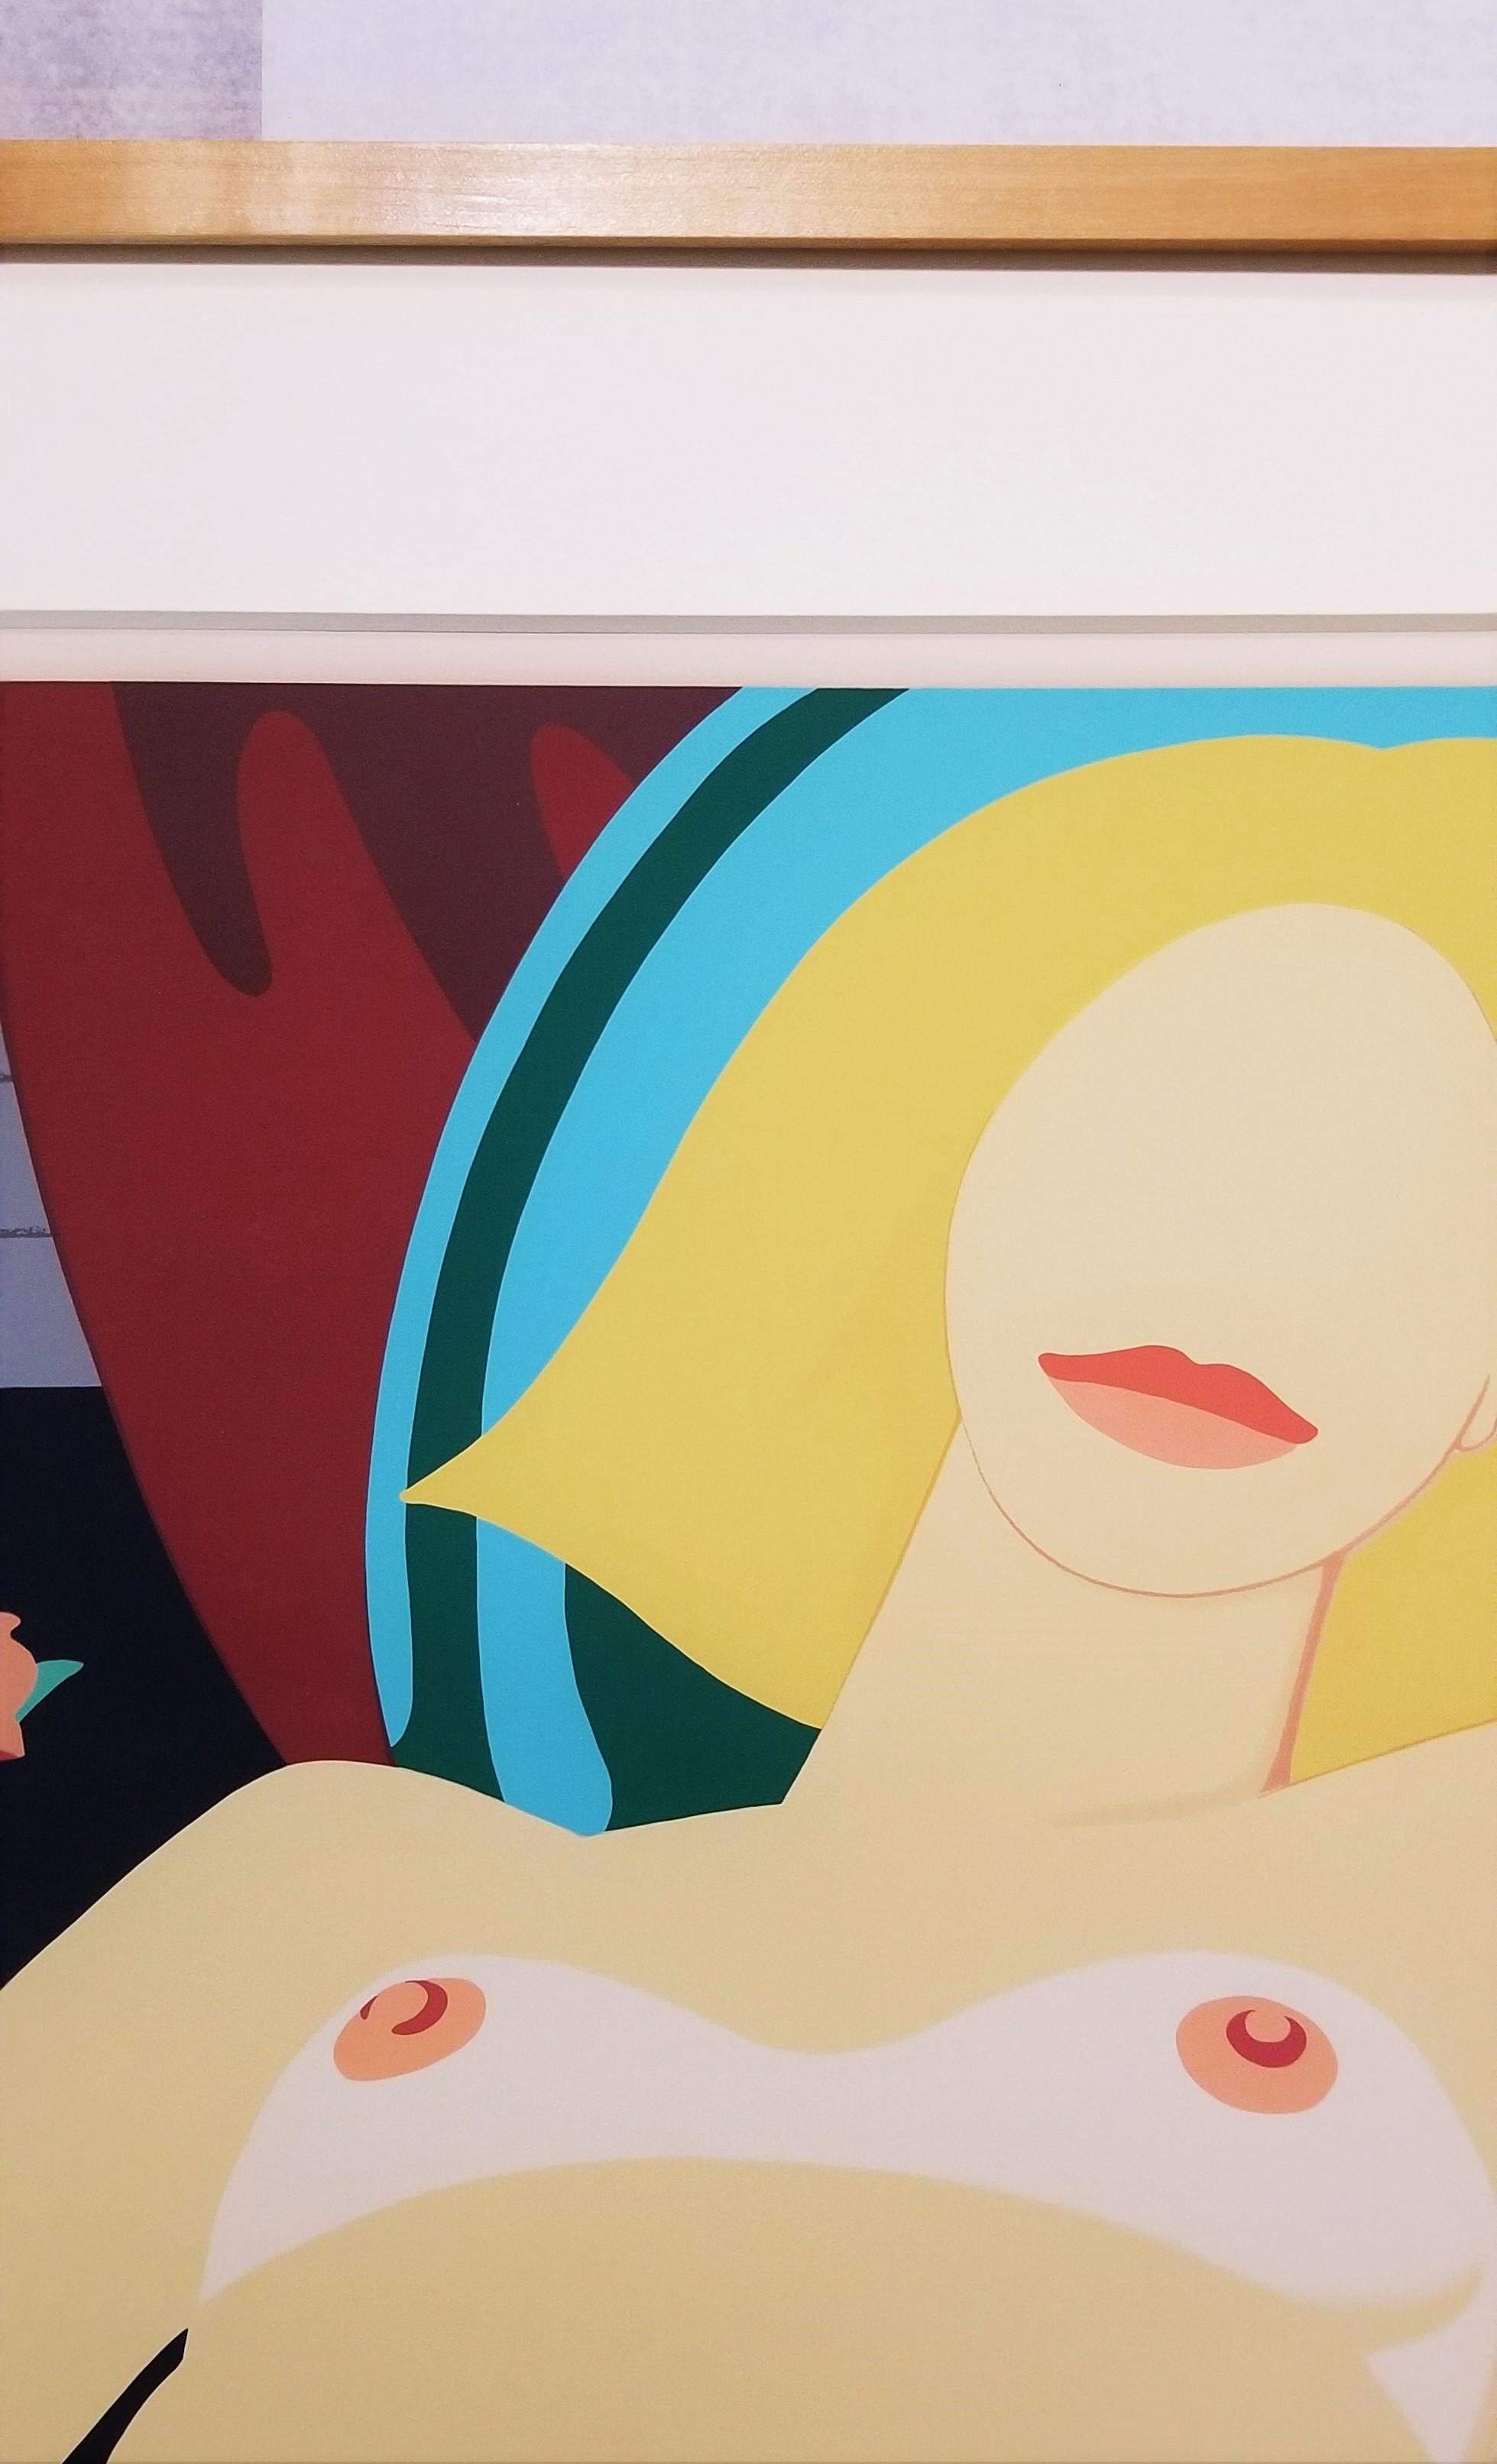 An original signed screenprint and lithograph on Arches 88 paper by American artist Tom Wesselmann (1931-2004) titled 